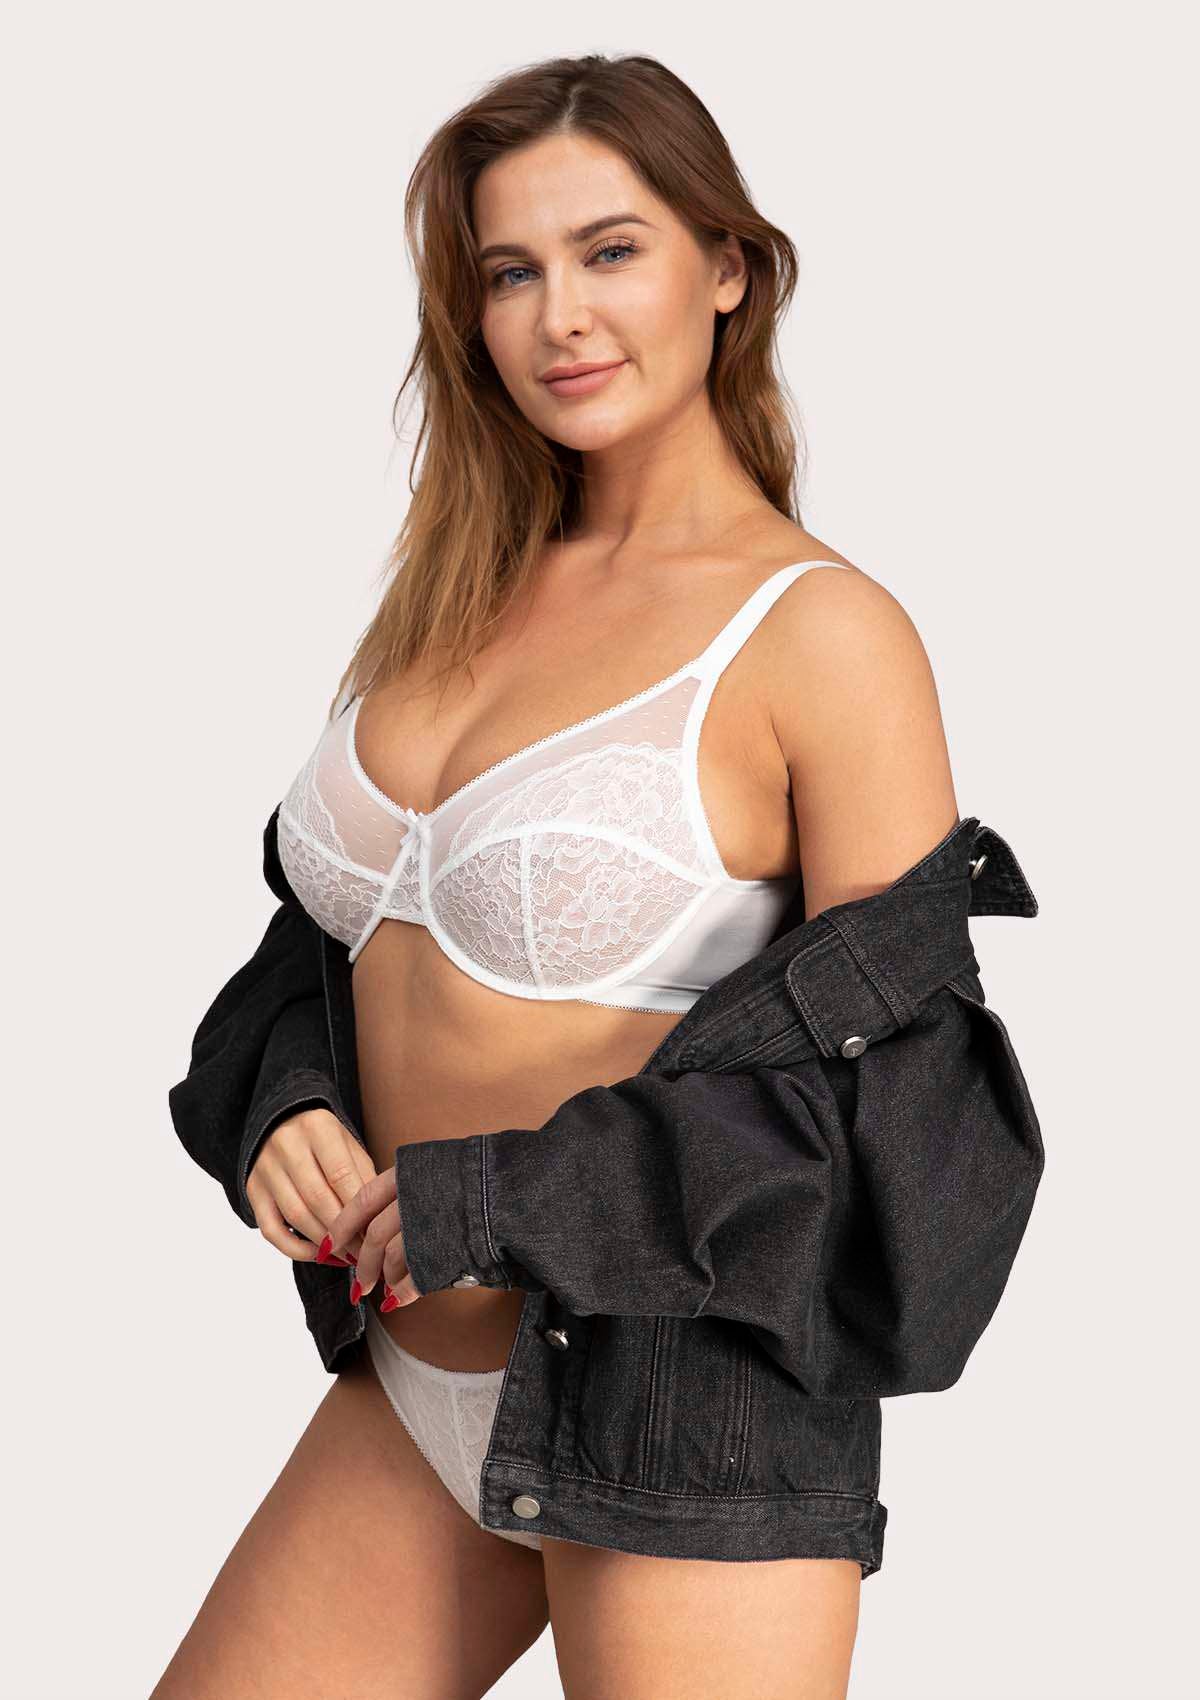 HSIA Enchante Lace Bra And Panties Set: Bra For Side And Back Fat - White / 44 / G